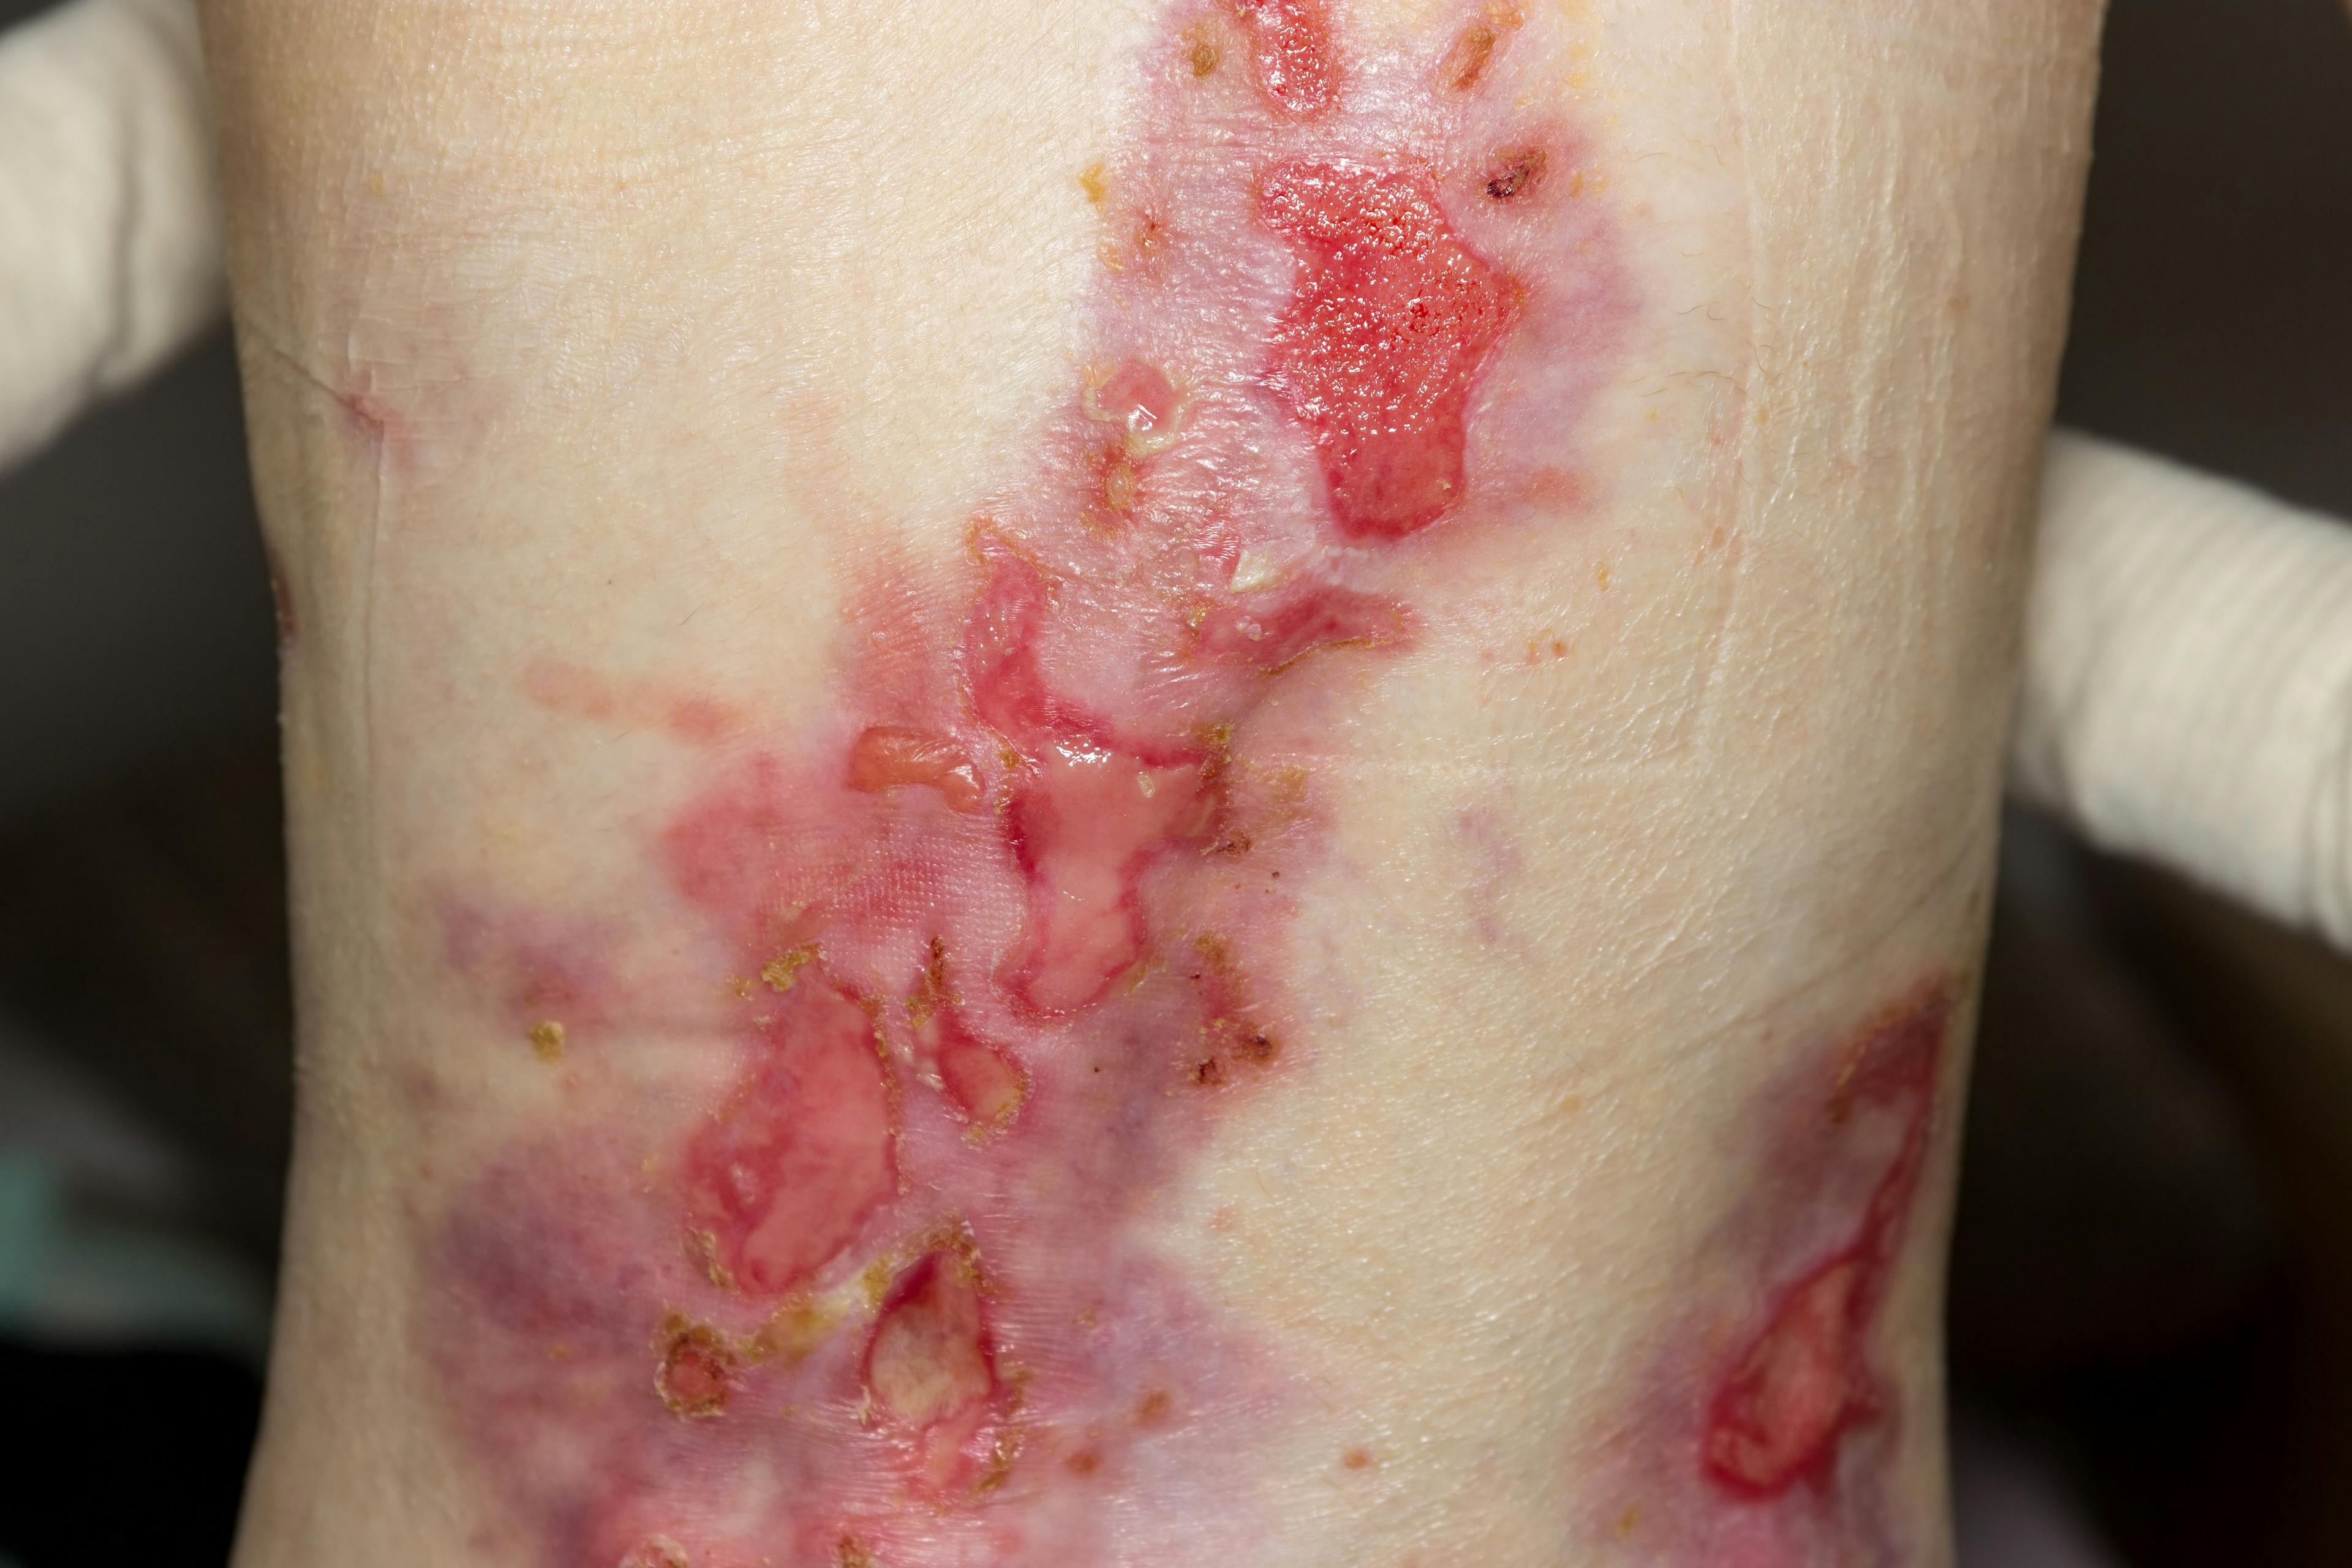 Autologous Cell Therapy Effective in Wound Treatment